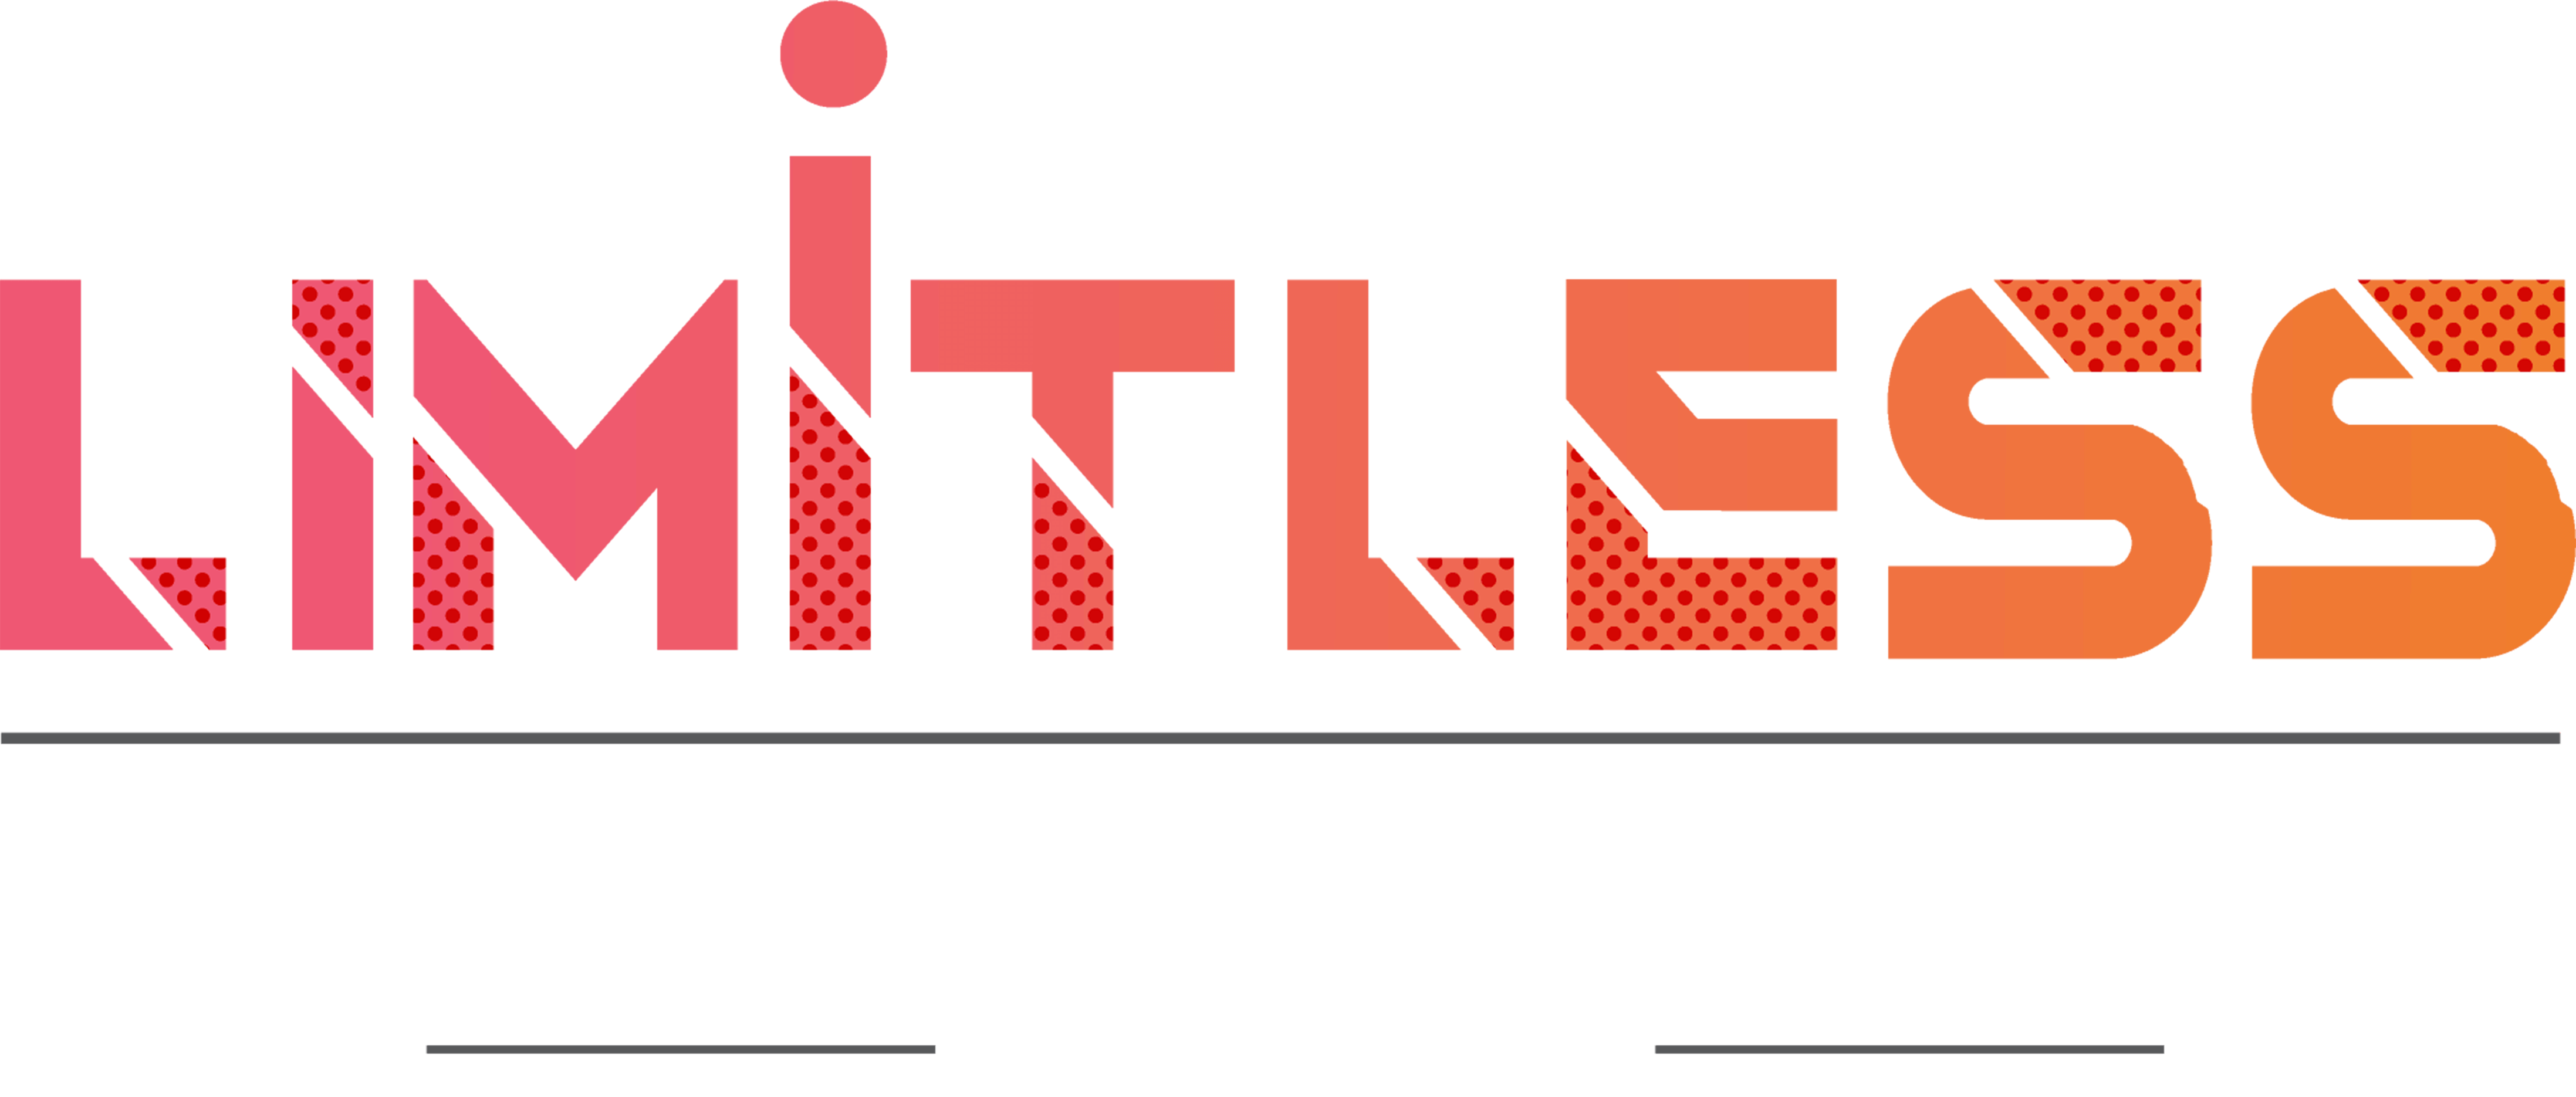 Limitless - A sales and marketing podcasts